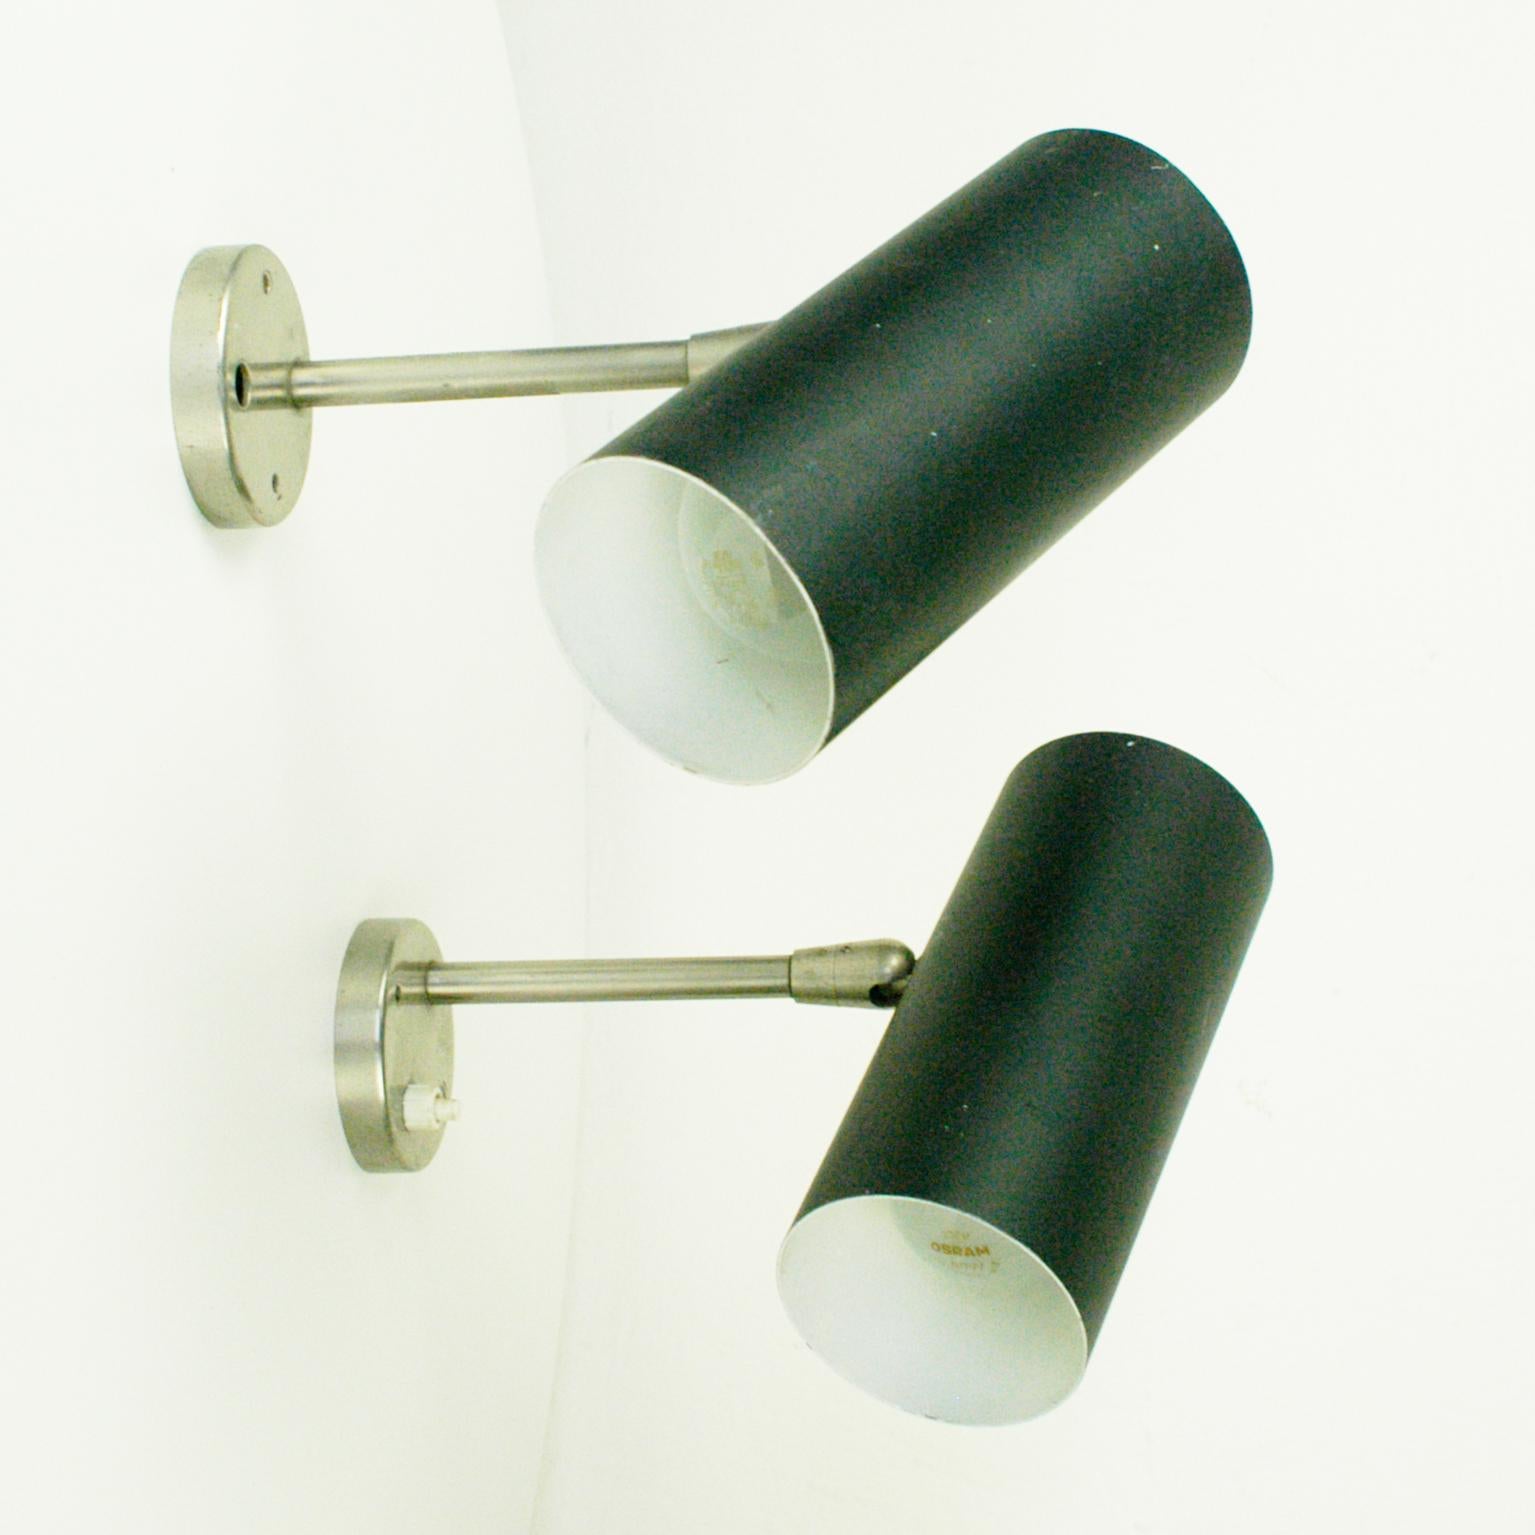 This minimalistic and pure Austrian Midcentury zylindrical pair of wall lights with was designed and manufactured by J. T. Kalmar in the 1960s in Vienna Austria.
They feature zylindtical black lacquered metal shades on a stainless steel base. The